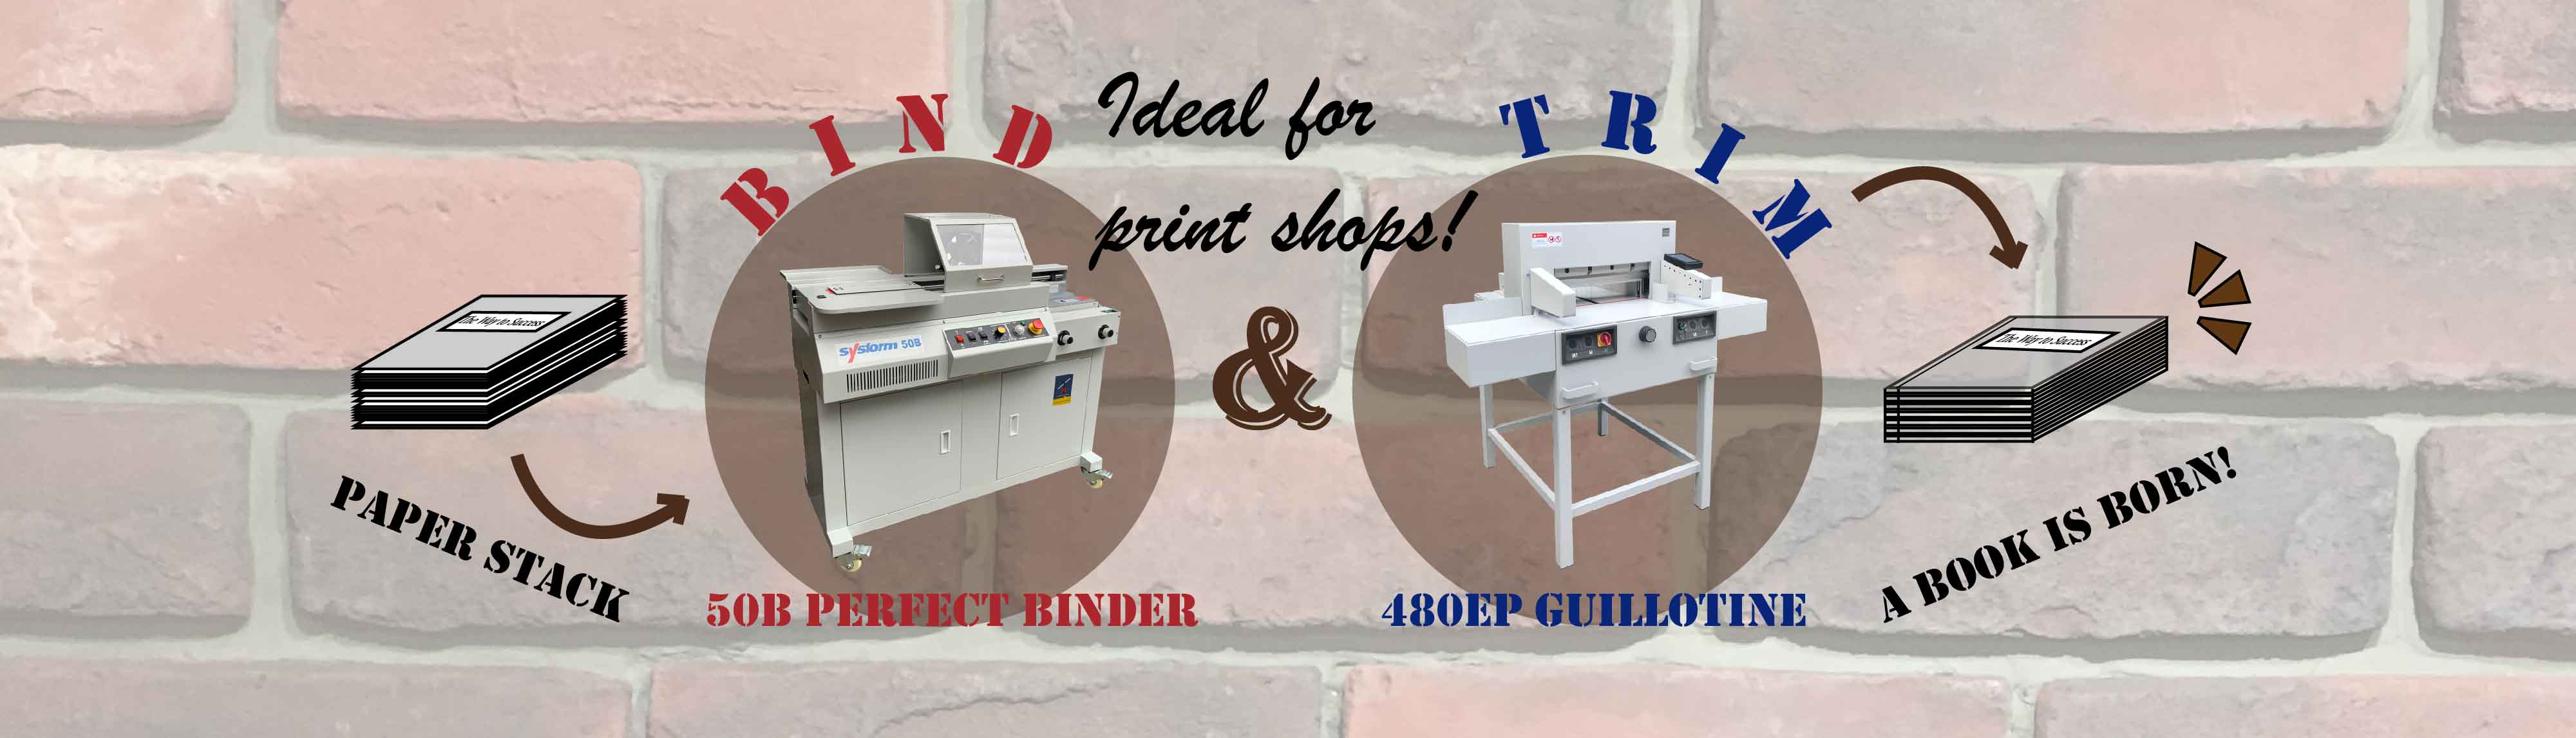 sysform guillotine and perfect binder for print shops